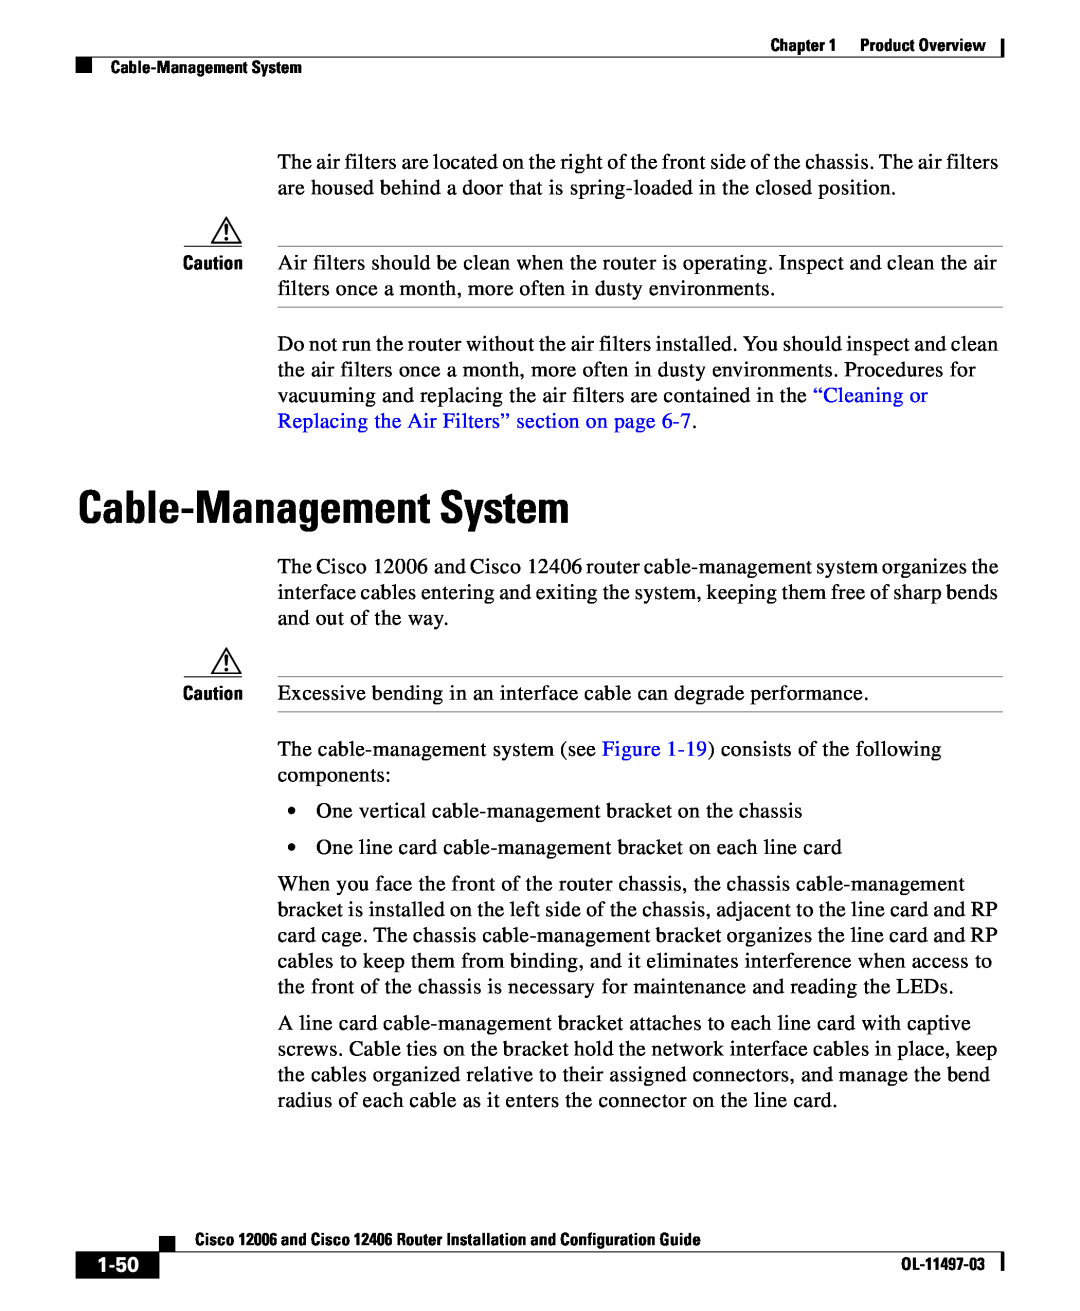 Cisco Systems 12406 series, 12006 series manual Cable-Management System, 1-50 